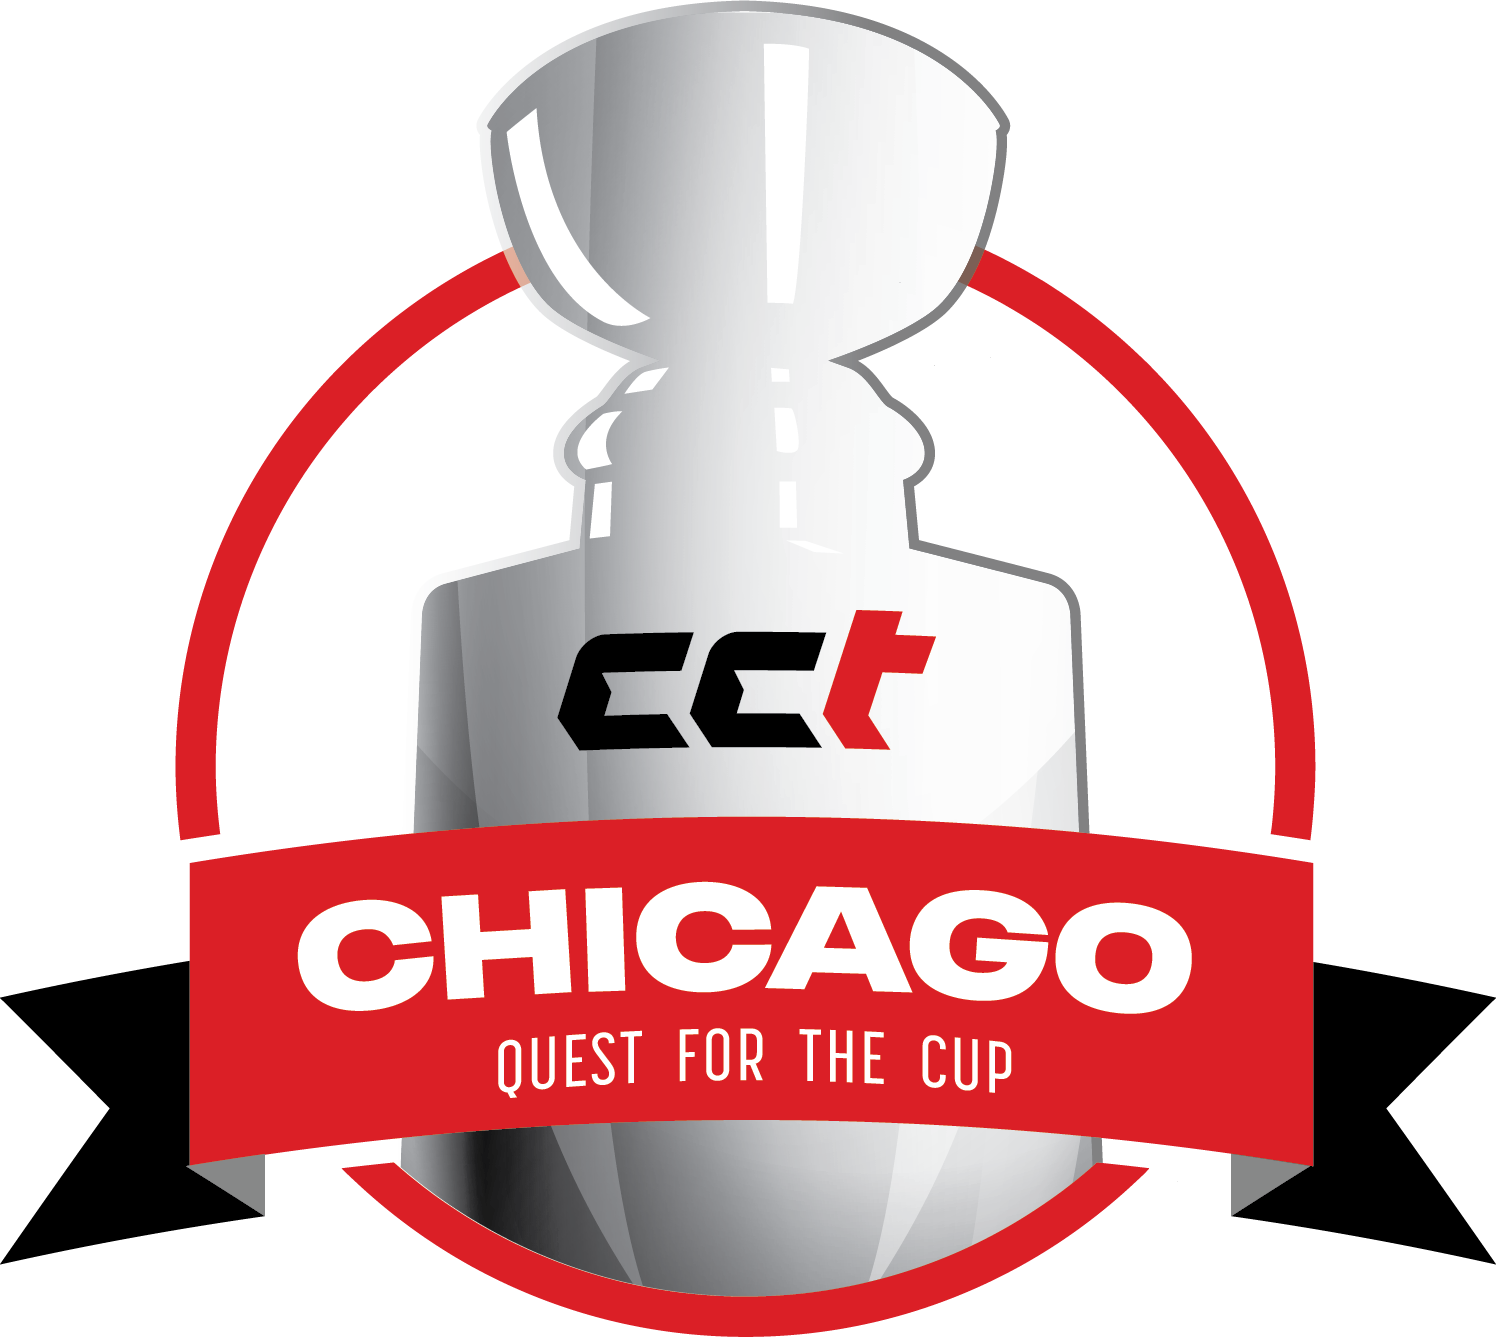 CHICAGO QUEST FOR THE CUP